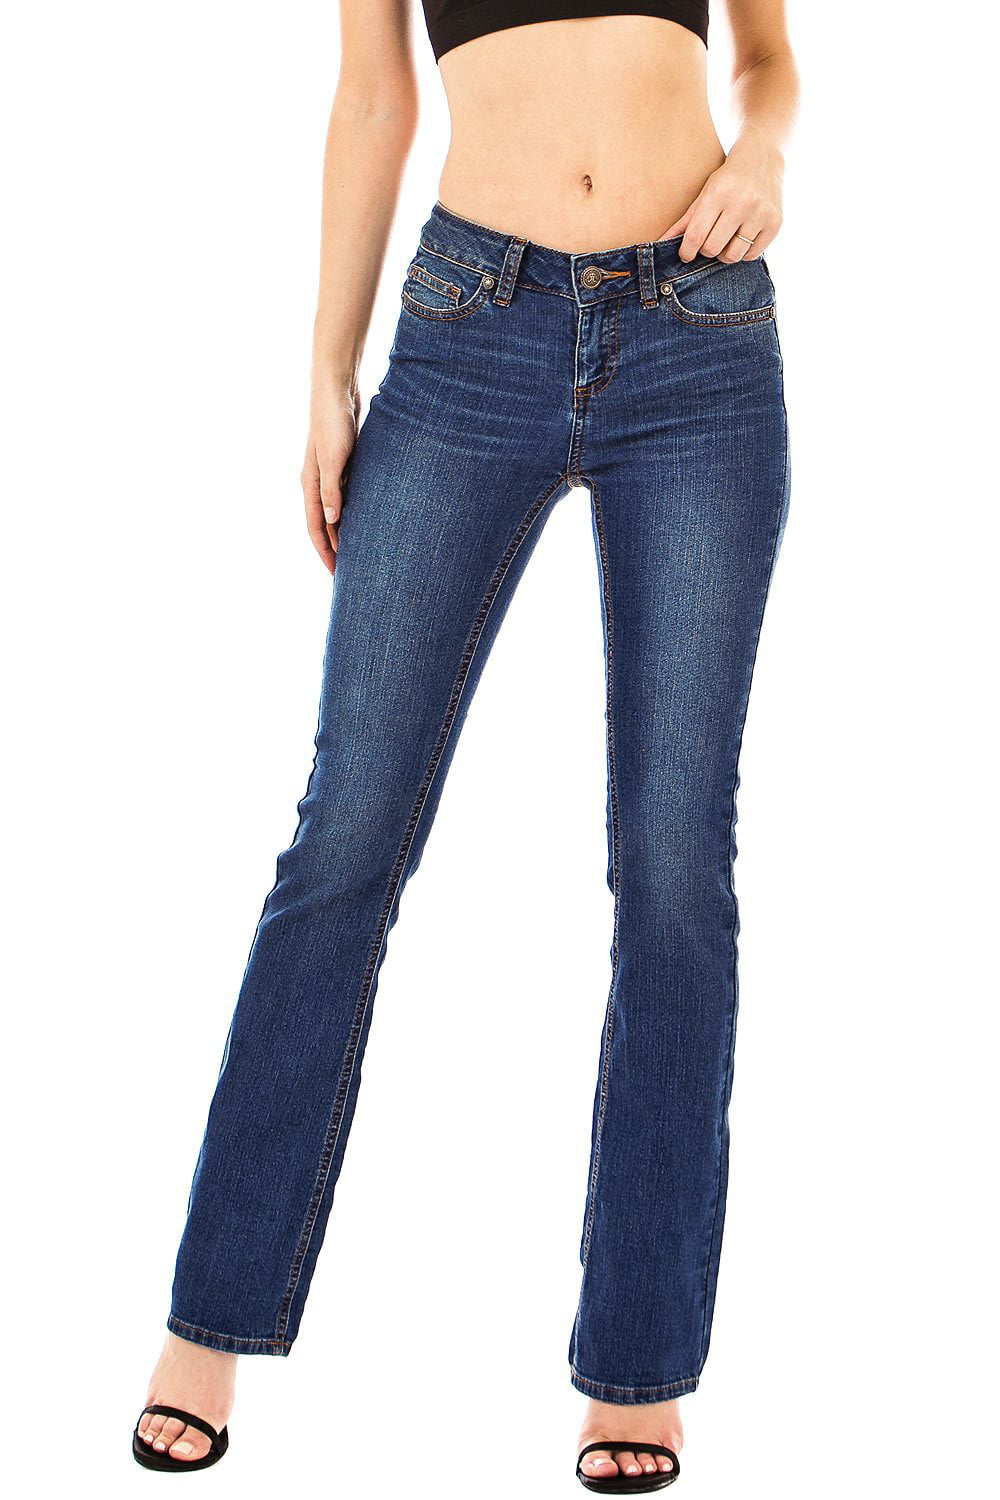 Juniors Mid Rise Slimming Bootcut Jeans 